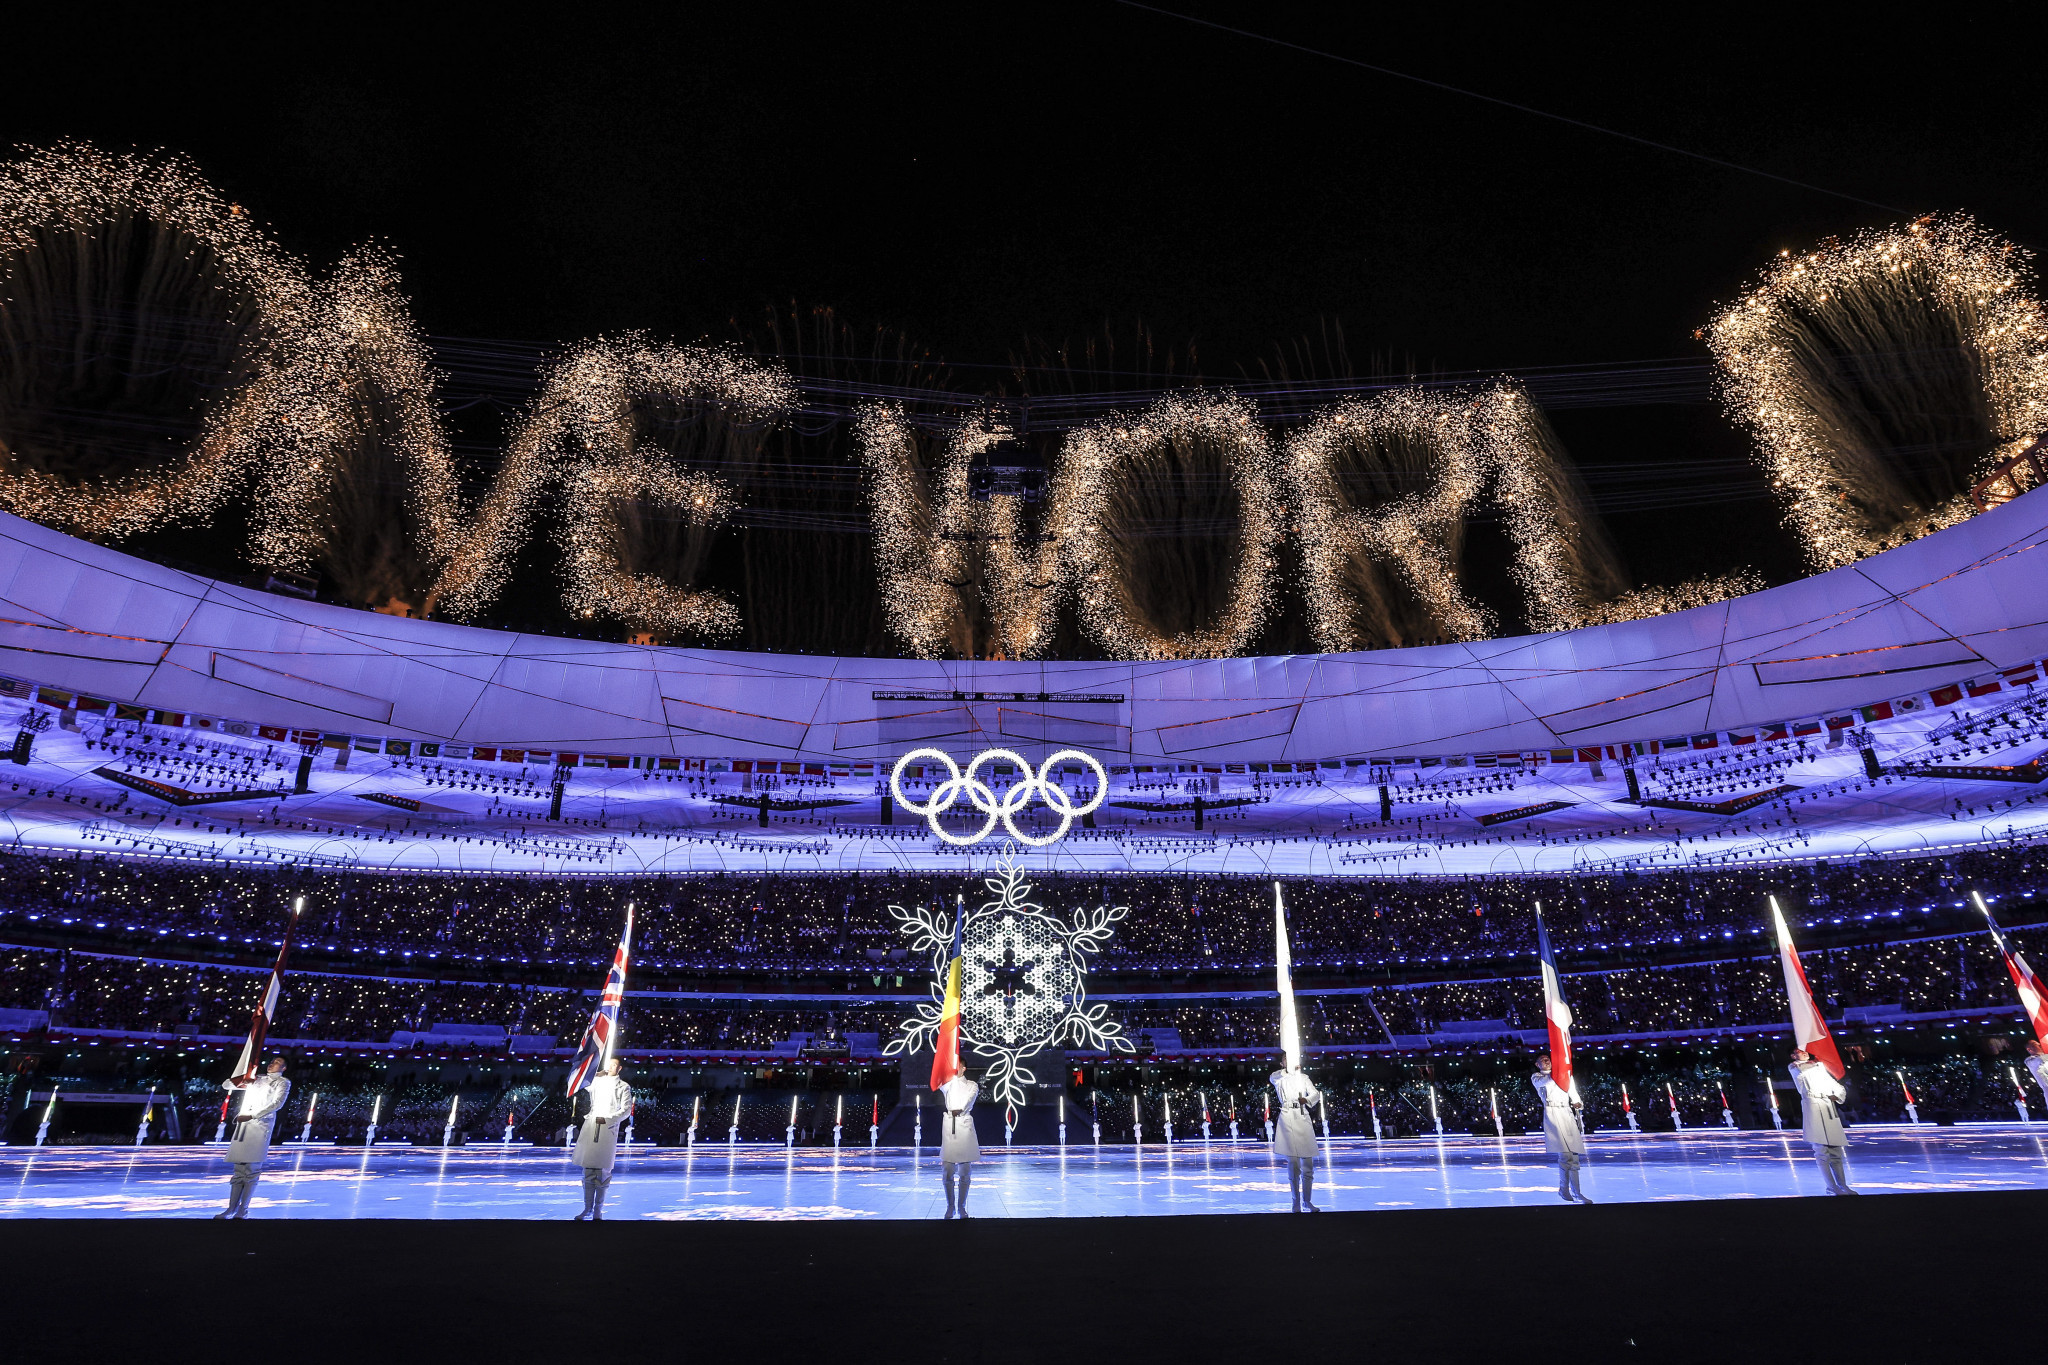 More than two billion people tuned in to watch the Beijing 2022 Winter Olympics ©Getty Images